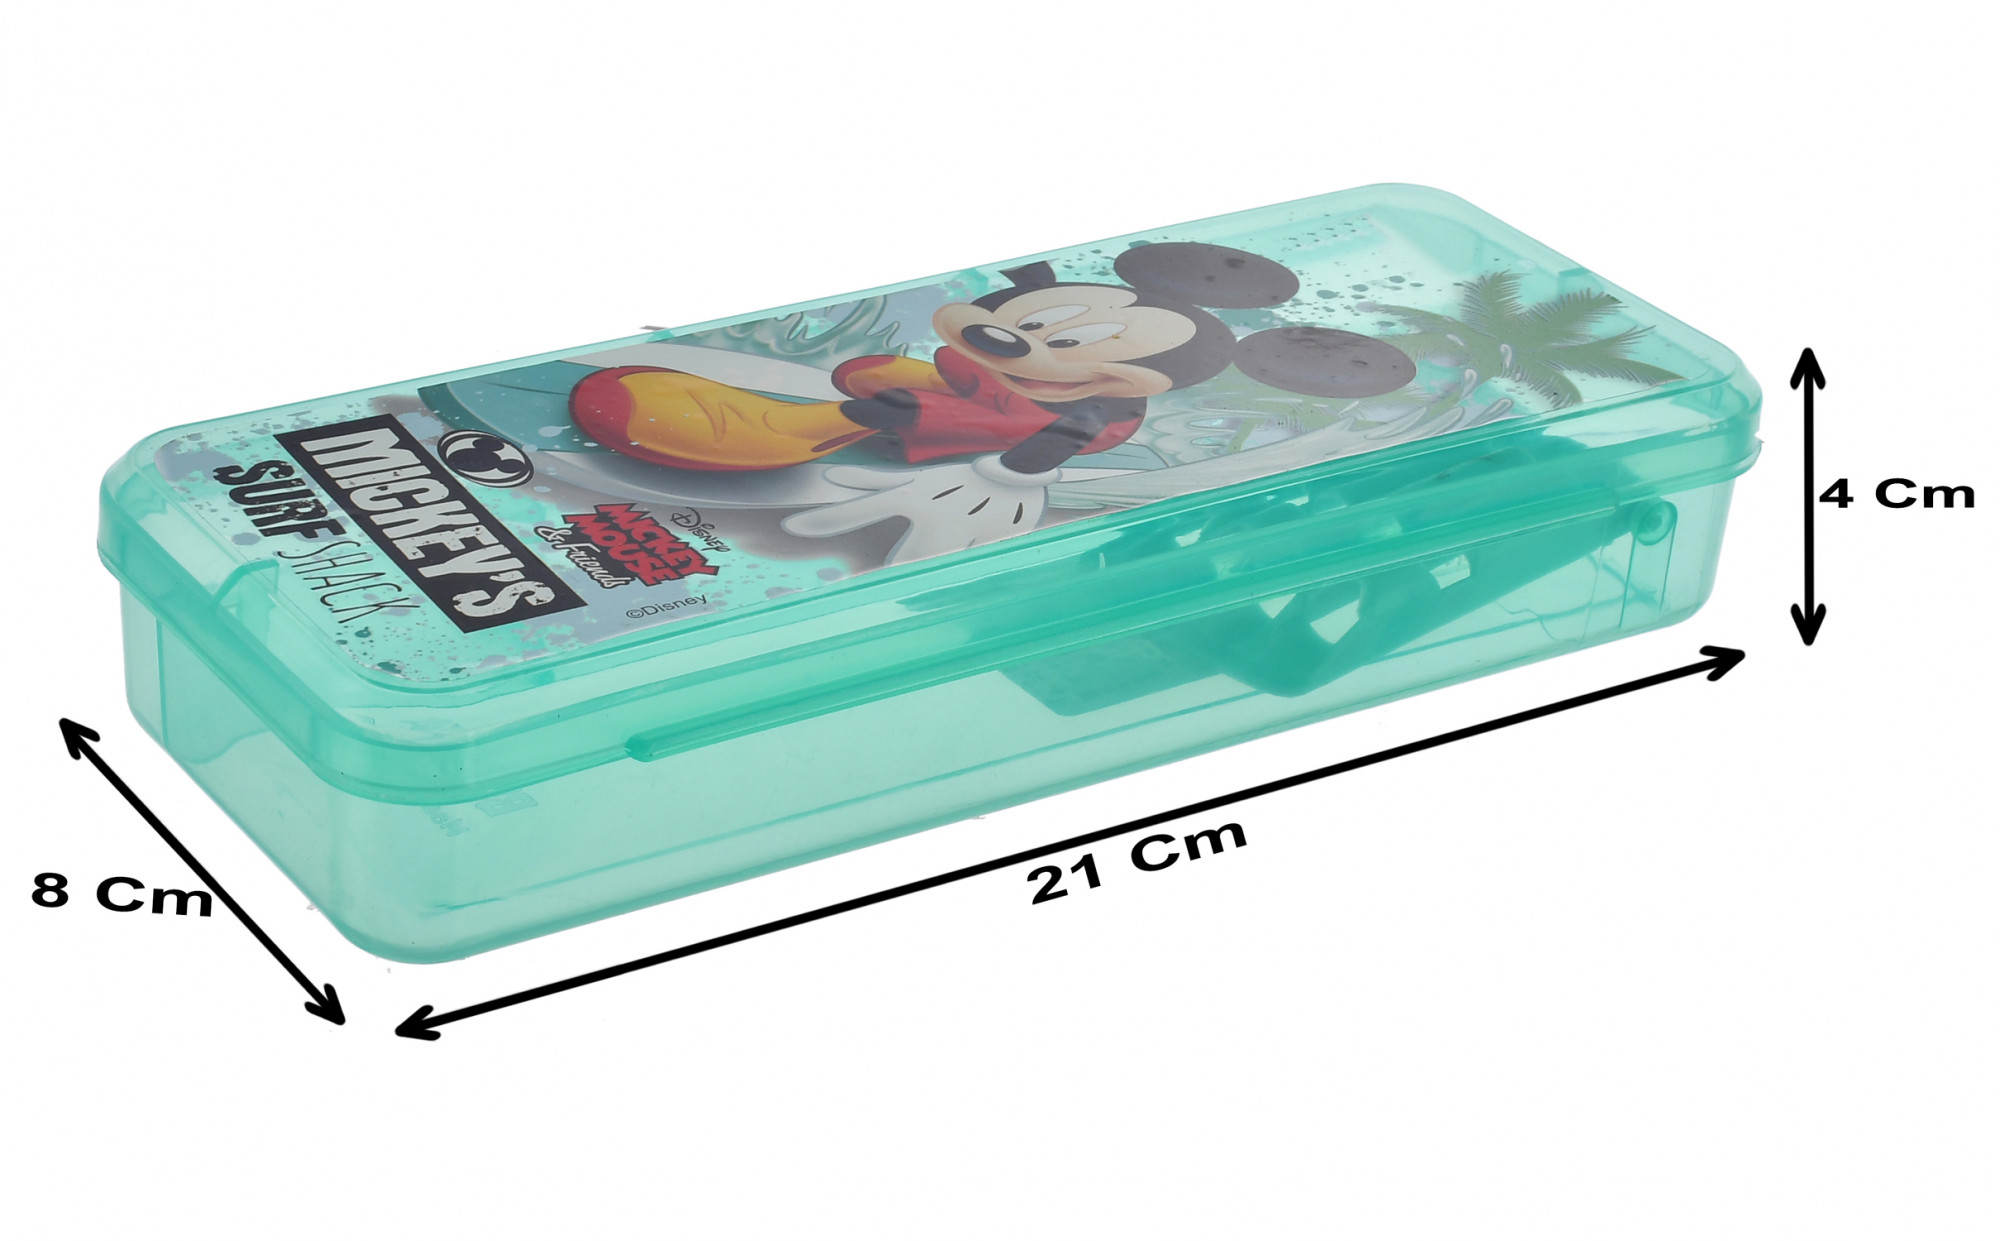 Kuber Industries Micky Mouse Printed Tranasparent Plastic Pencil Box for Kids (Green)